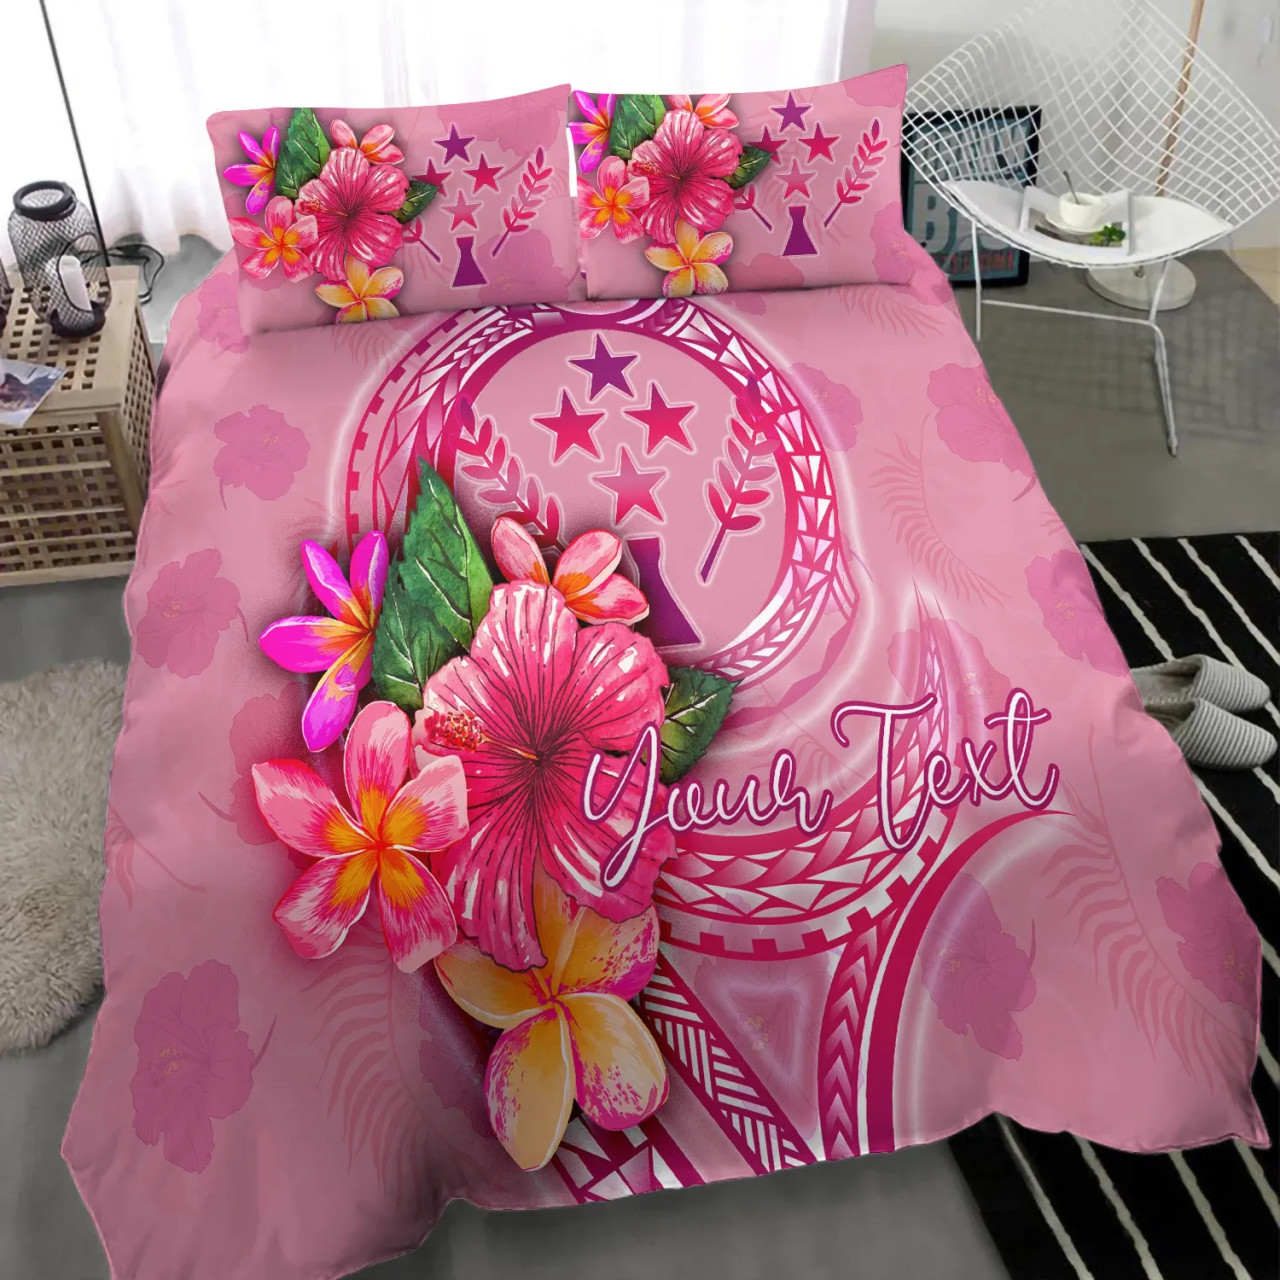 Tuvalu Polynesian Bedding Set - Floral With Seal Pink 6